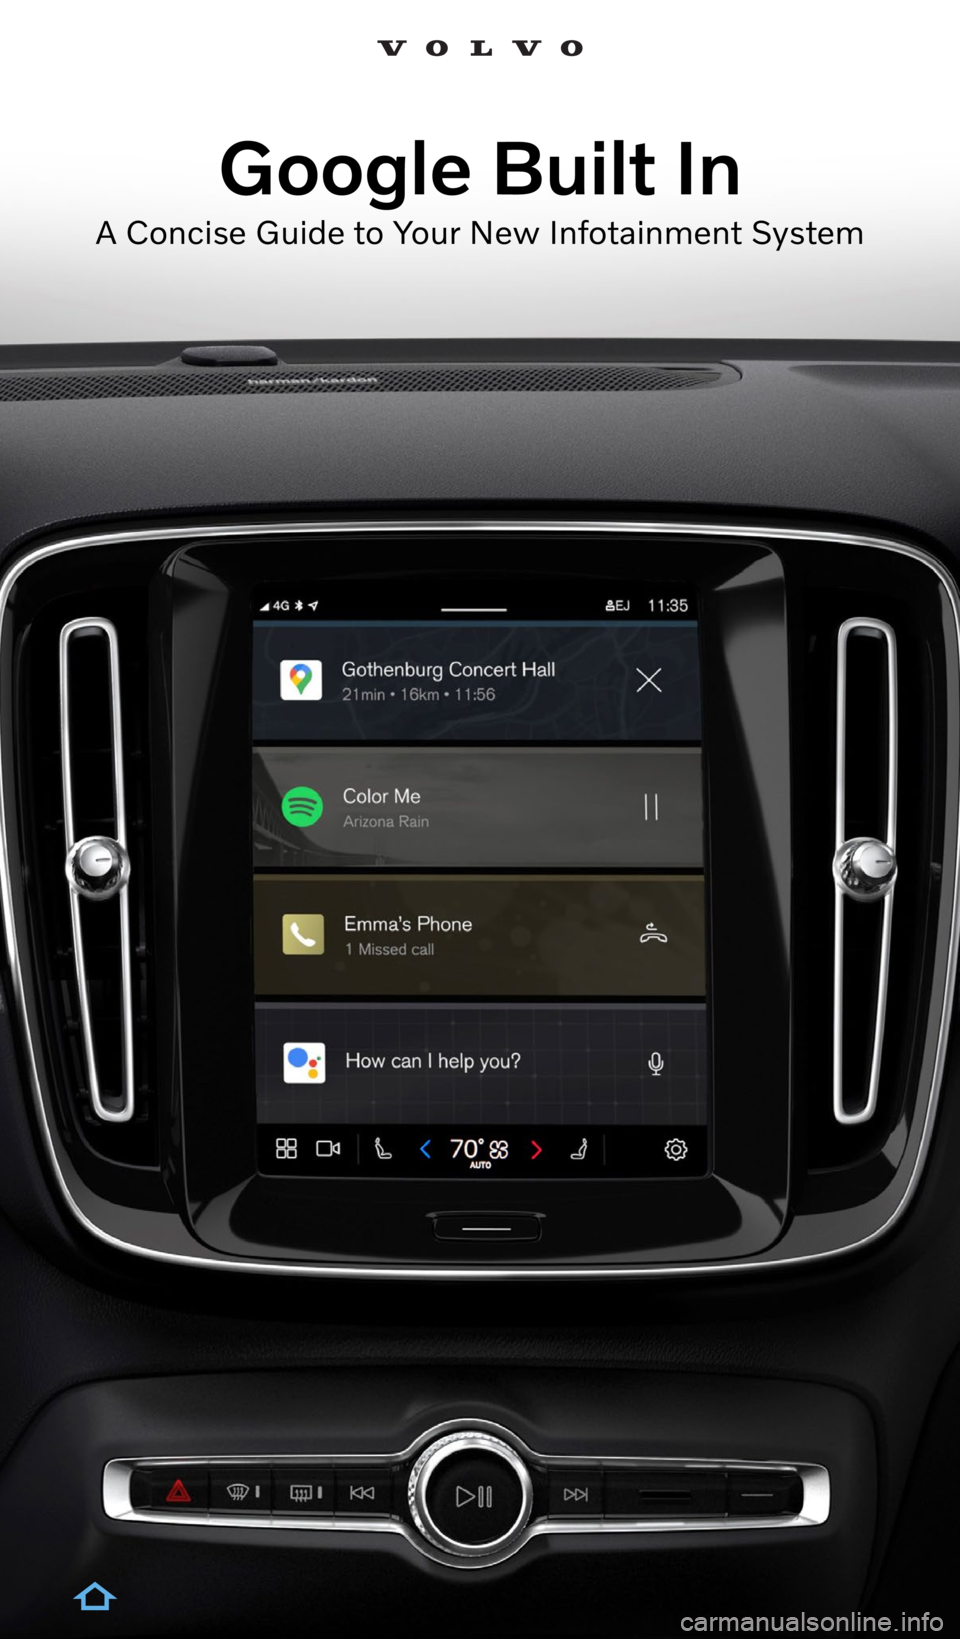 VOLVO S90 2022  Google Digital Guide Google Built In
A Concise Guide to Your New Infotainment System  